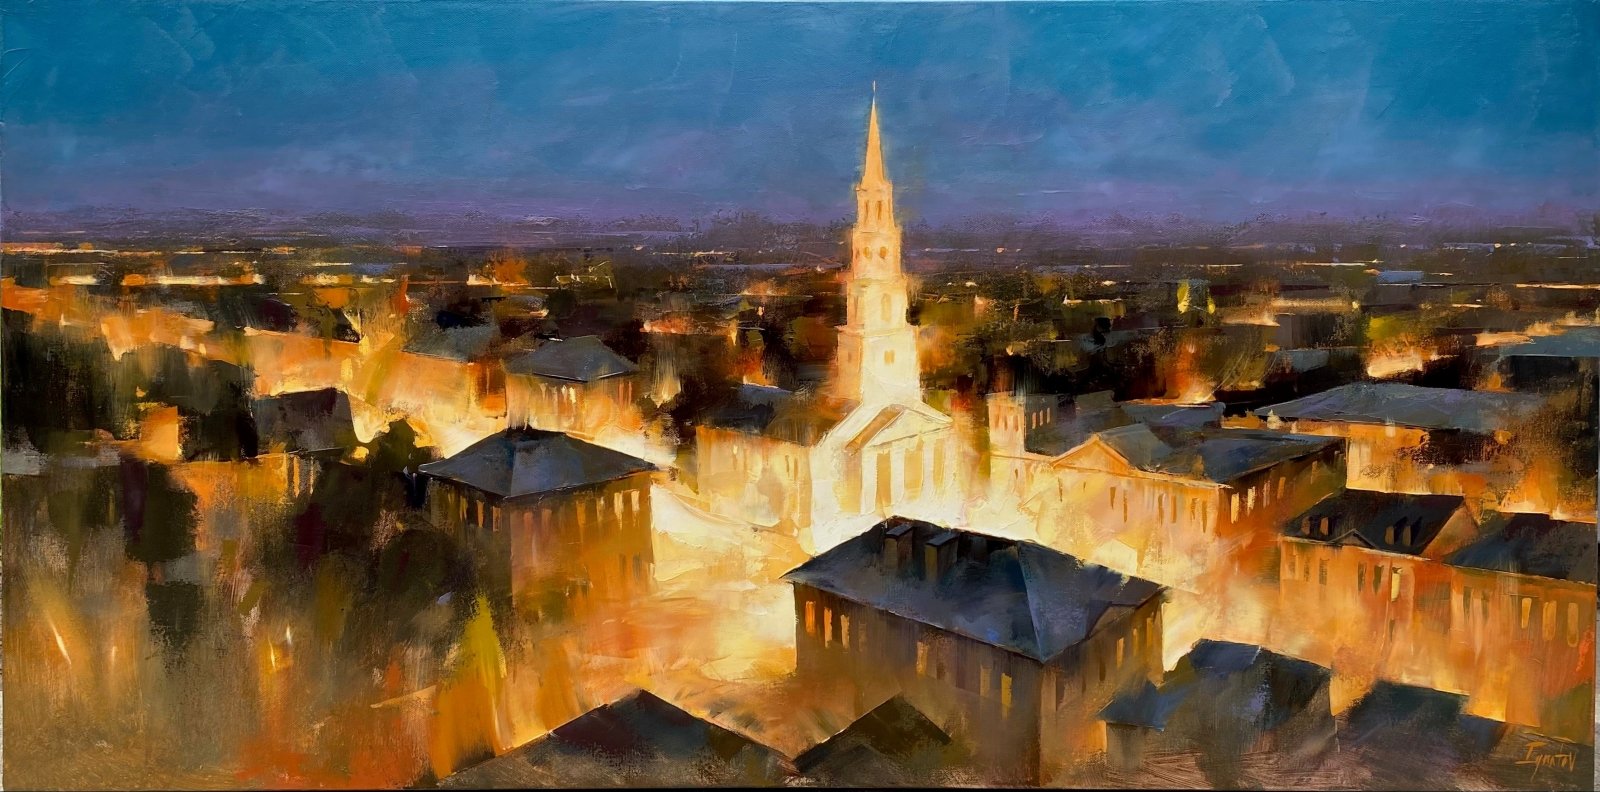 St. Michael's Nocturne by Ignat Ignatov at LePrince Galleries